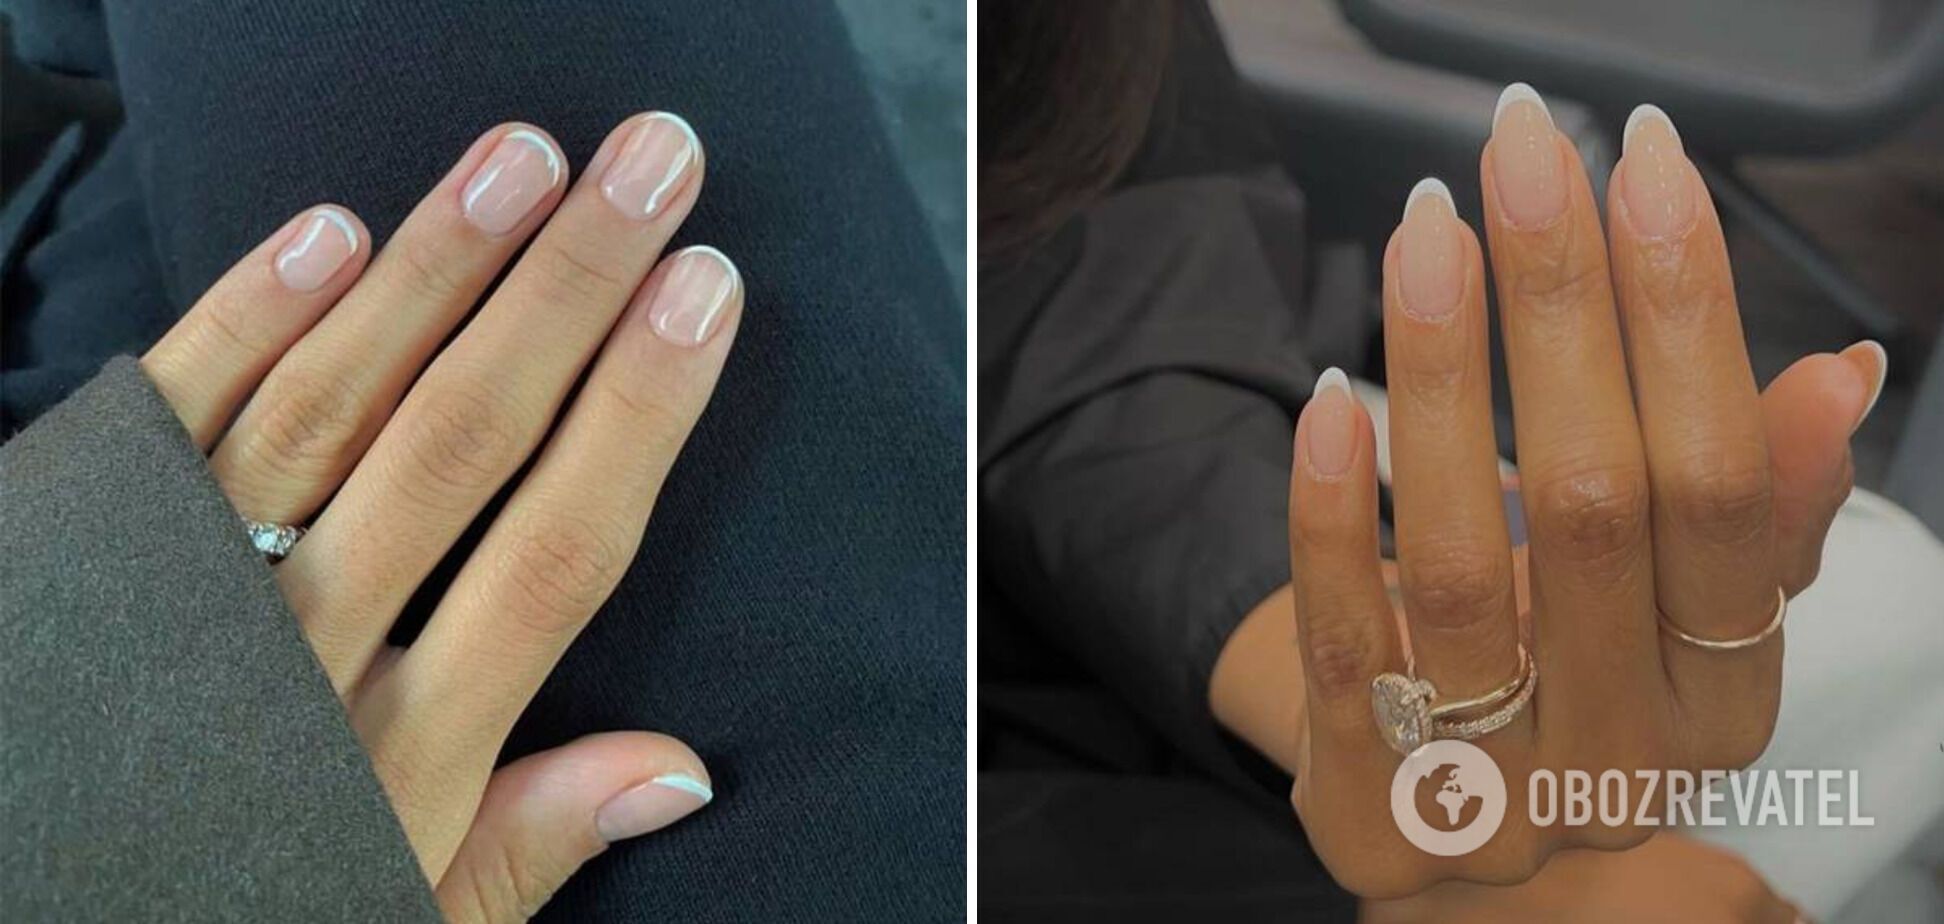 Trendy November manicure: 4 top nail colors that you can't lose with